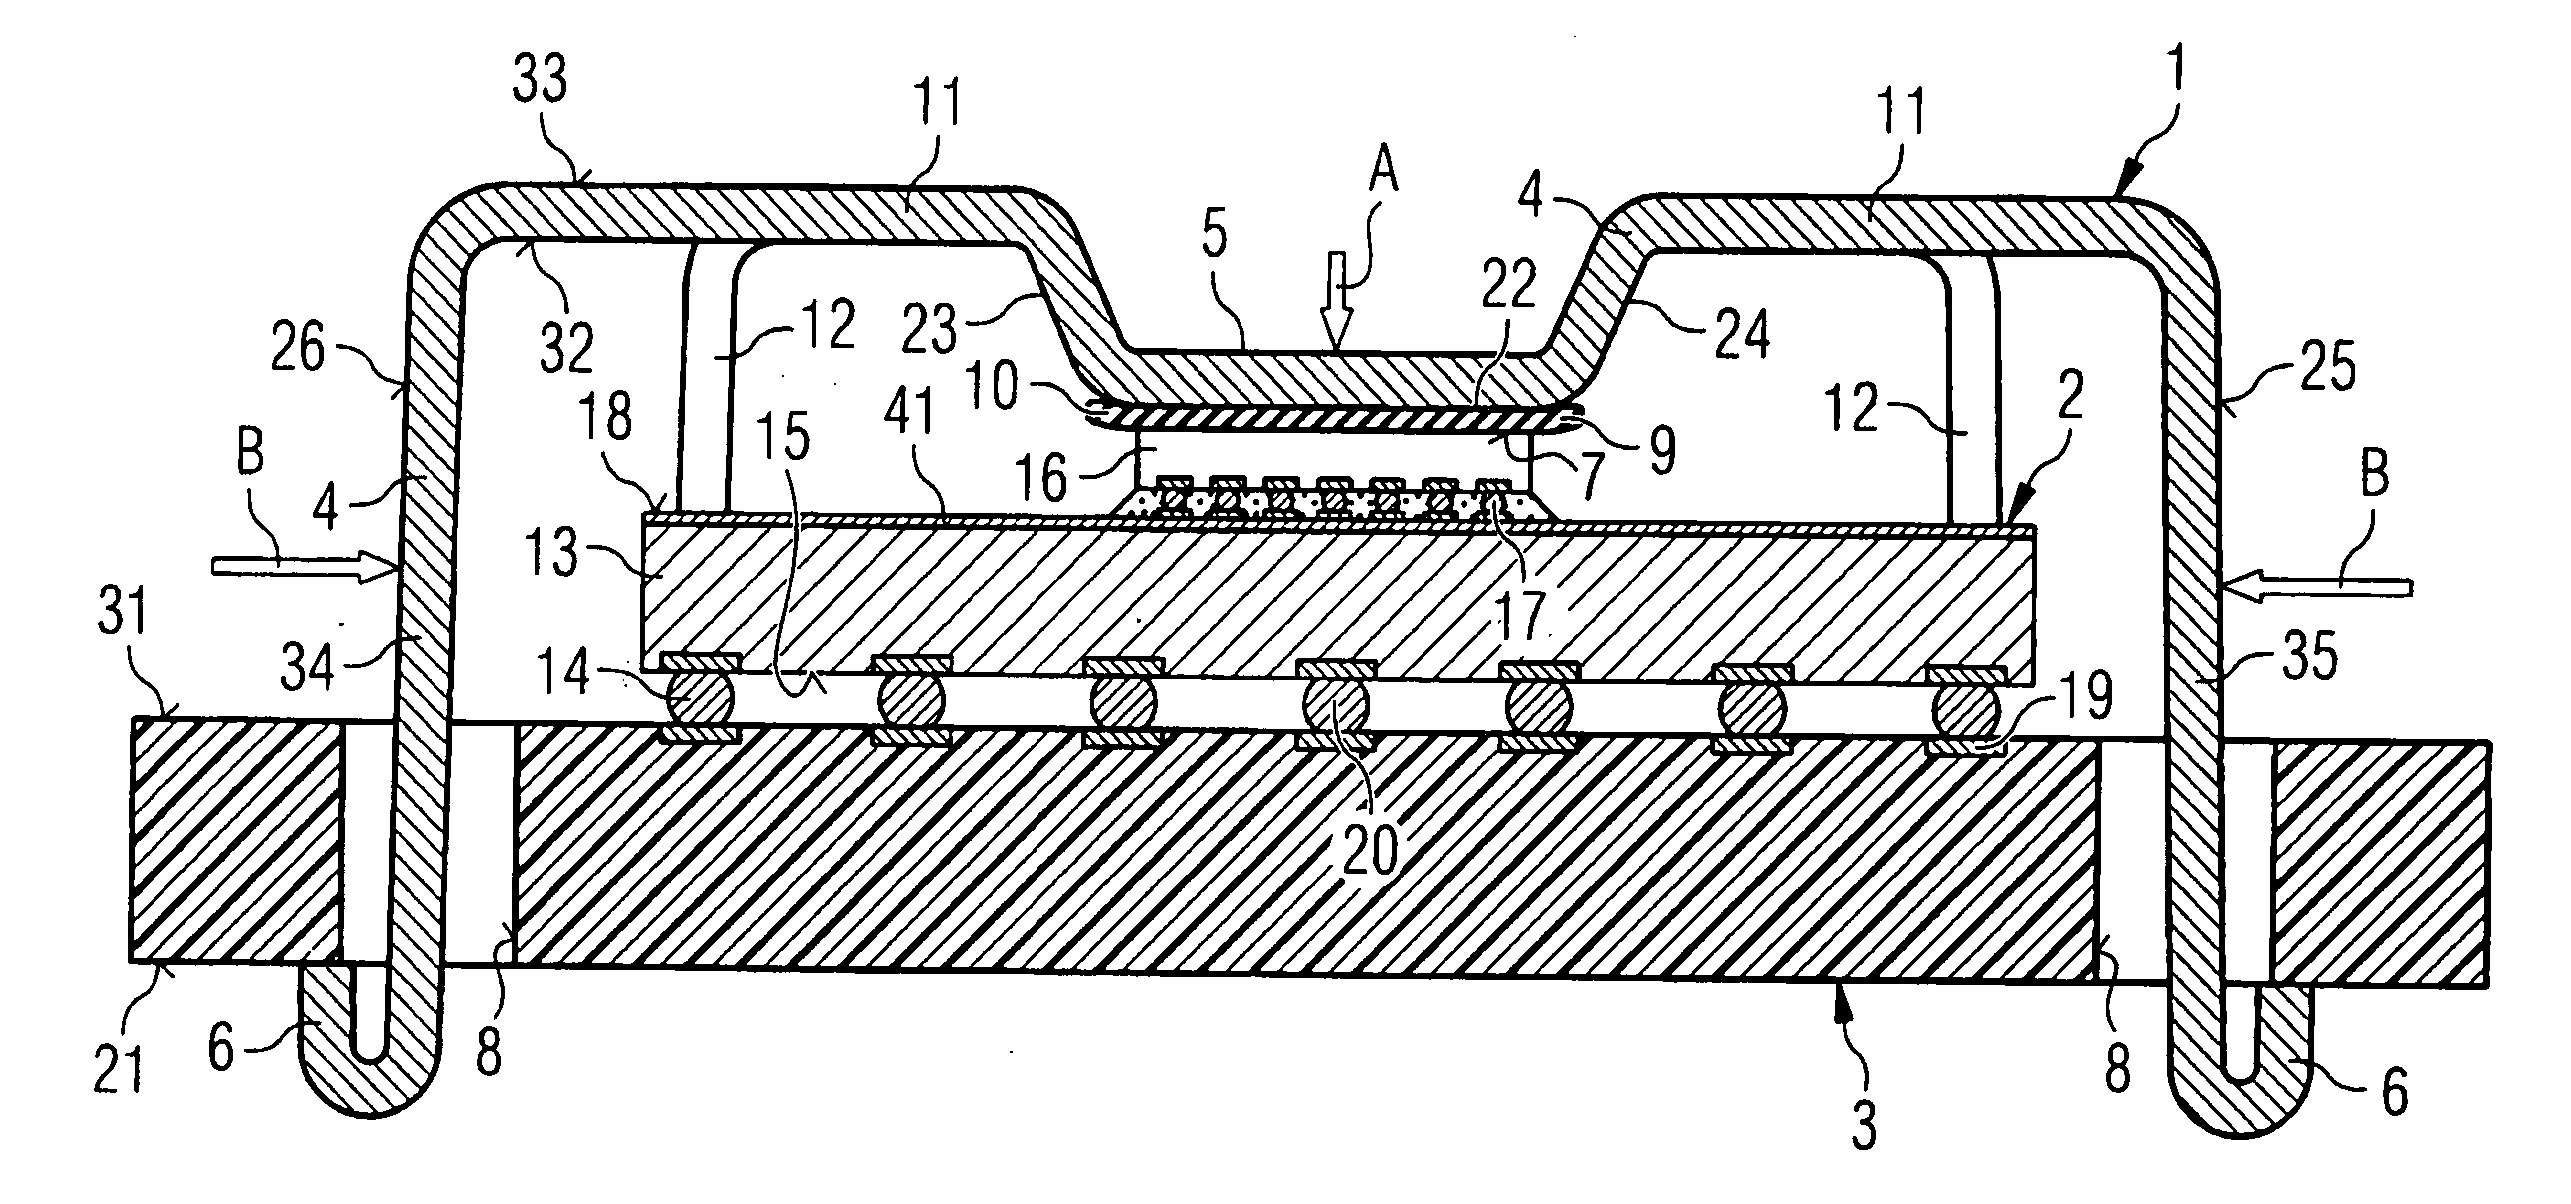 Heat sink for surface-mounted semiconductor devices